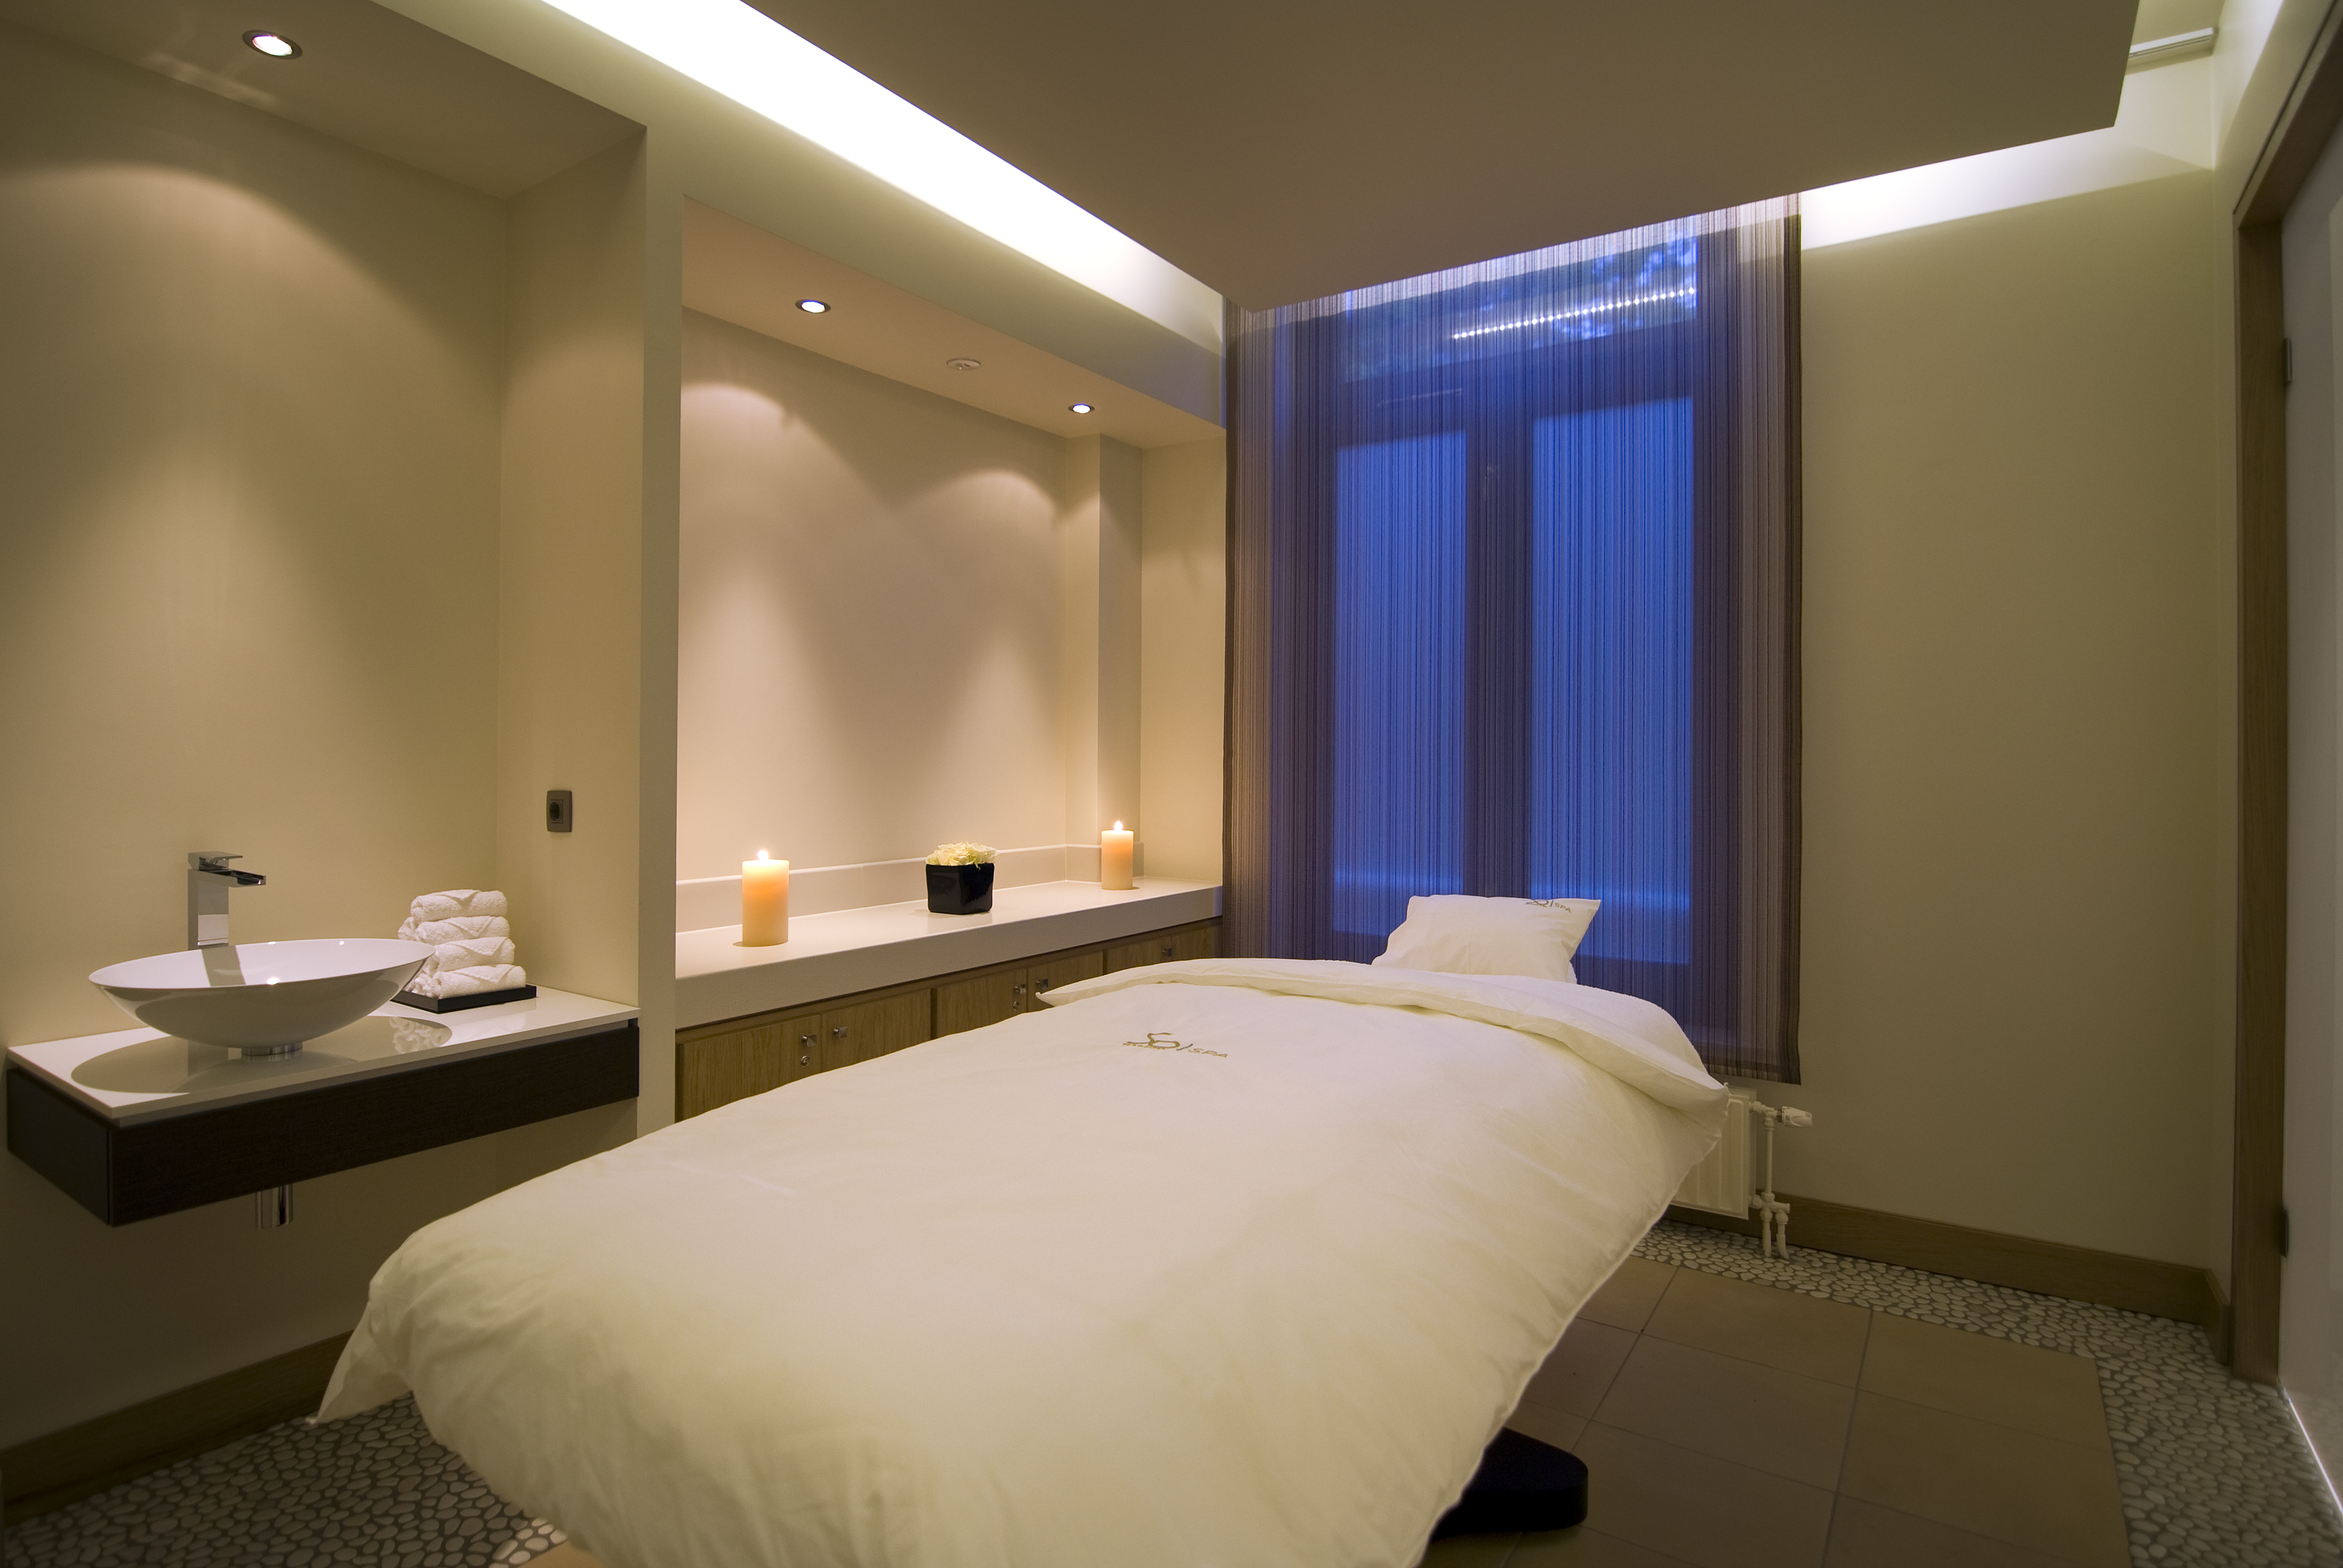 23d. So SPA duo treatment rooms